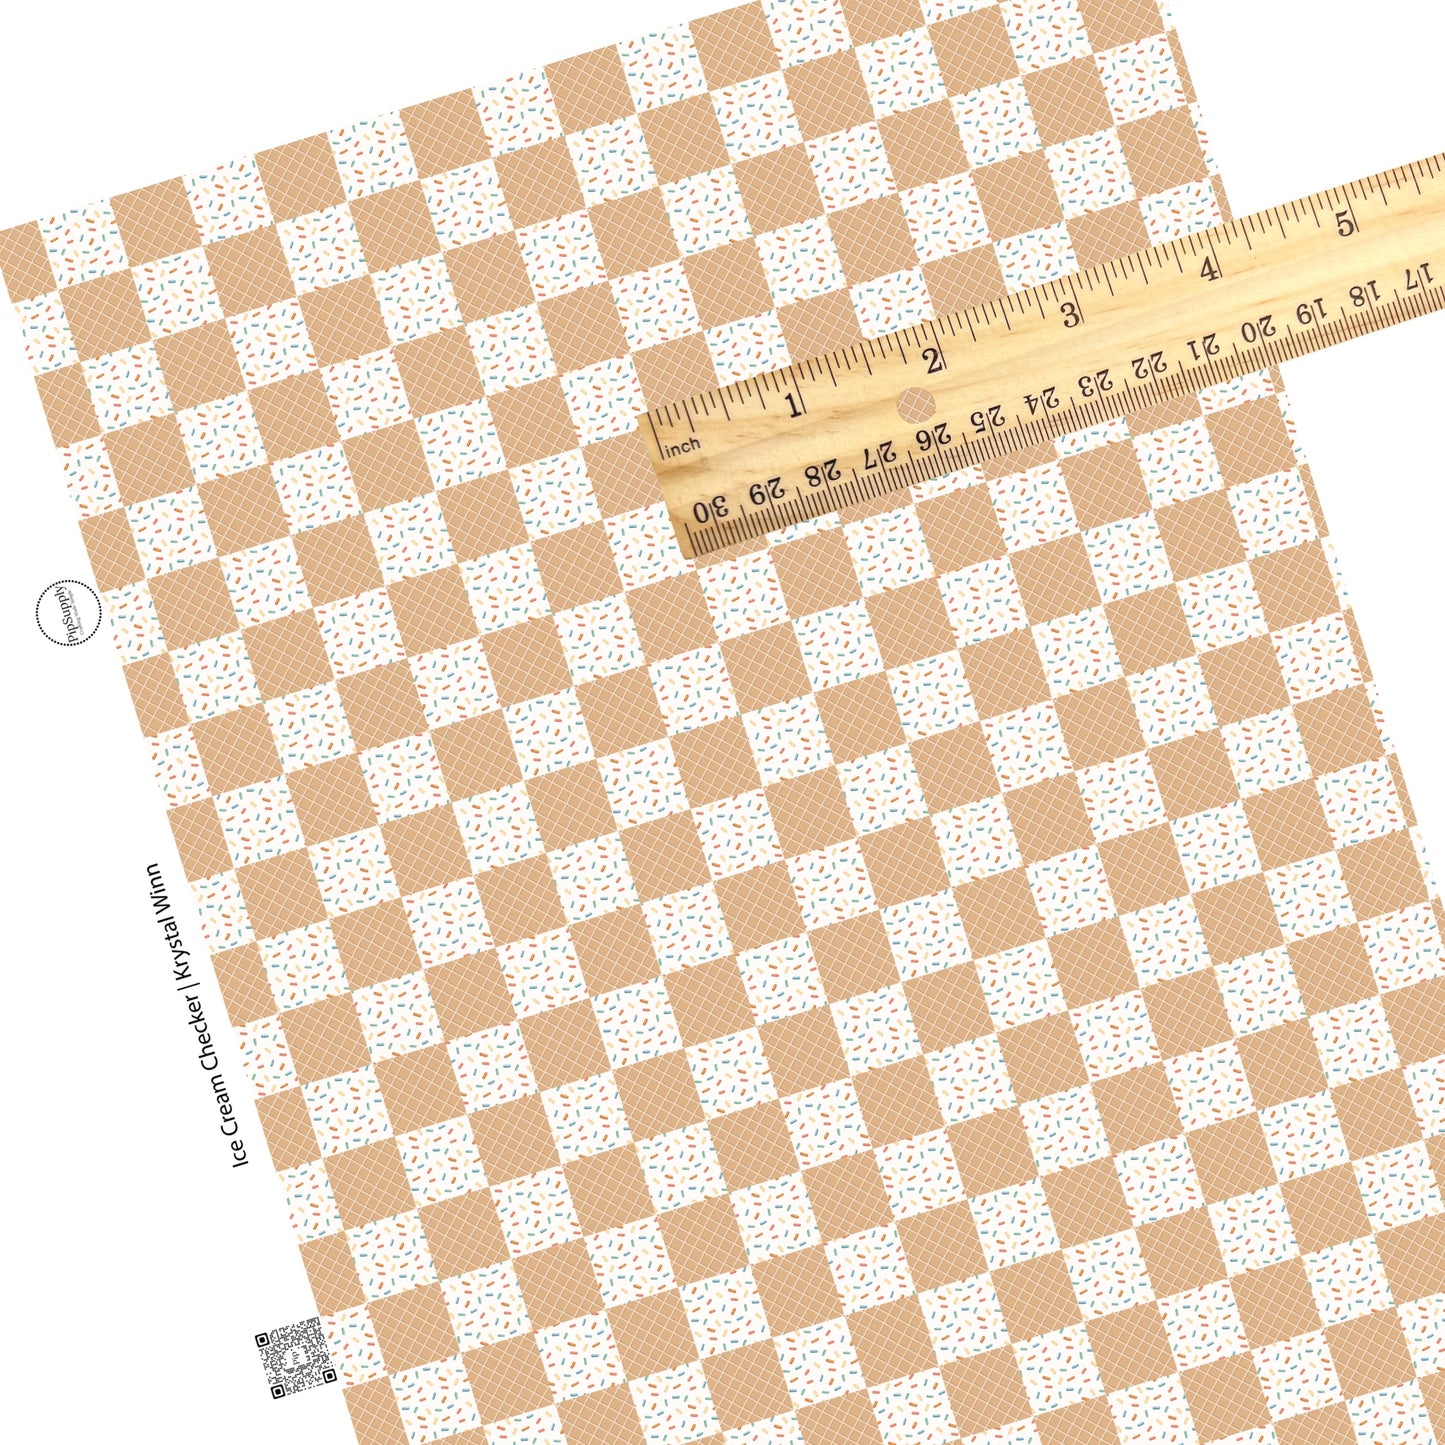 These dessert checkered themed faux leather sheets contain the following design elements: checkered pattern that features cream with colorful sprinkles and light brown ice cream cone pattern. Our CPSIA compliant faux leather sheets or rolls can be used for all types of crafting projects.